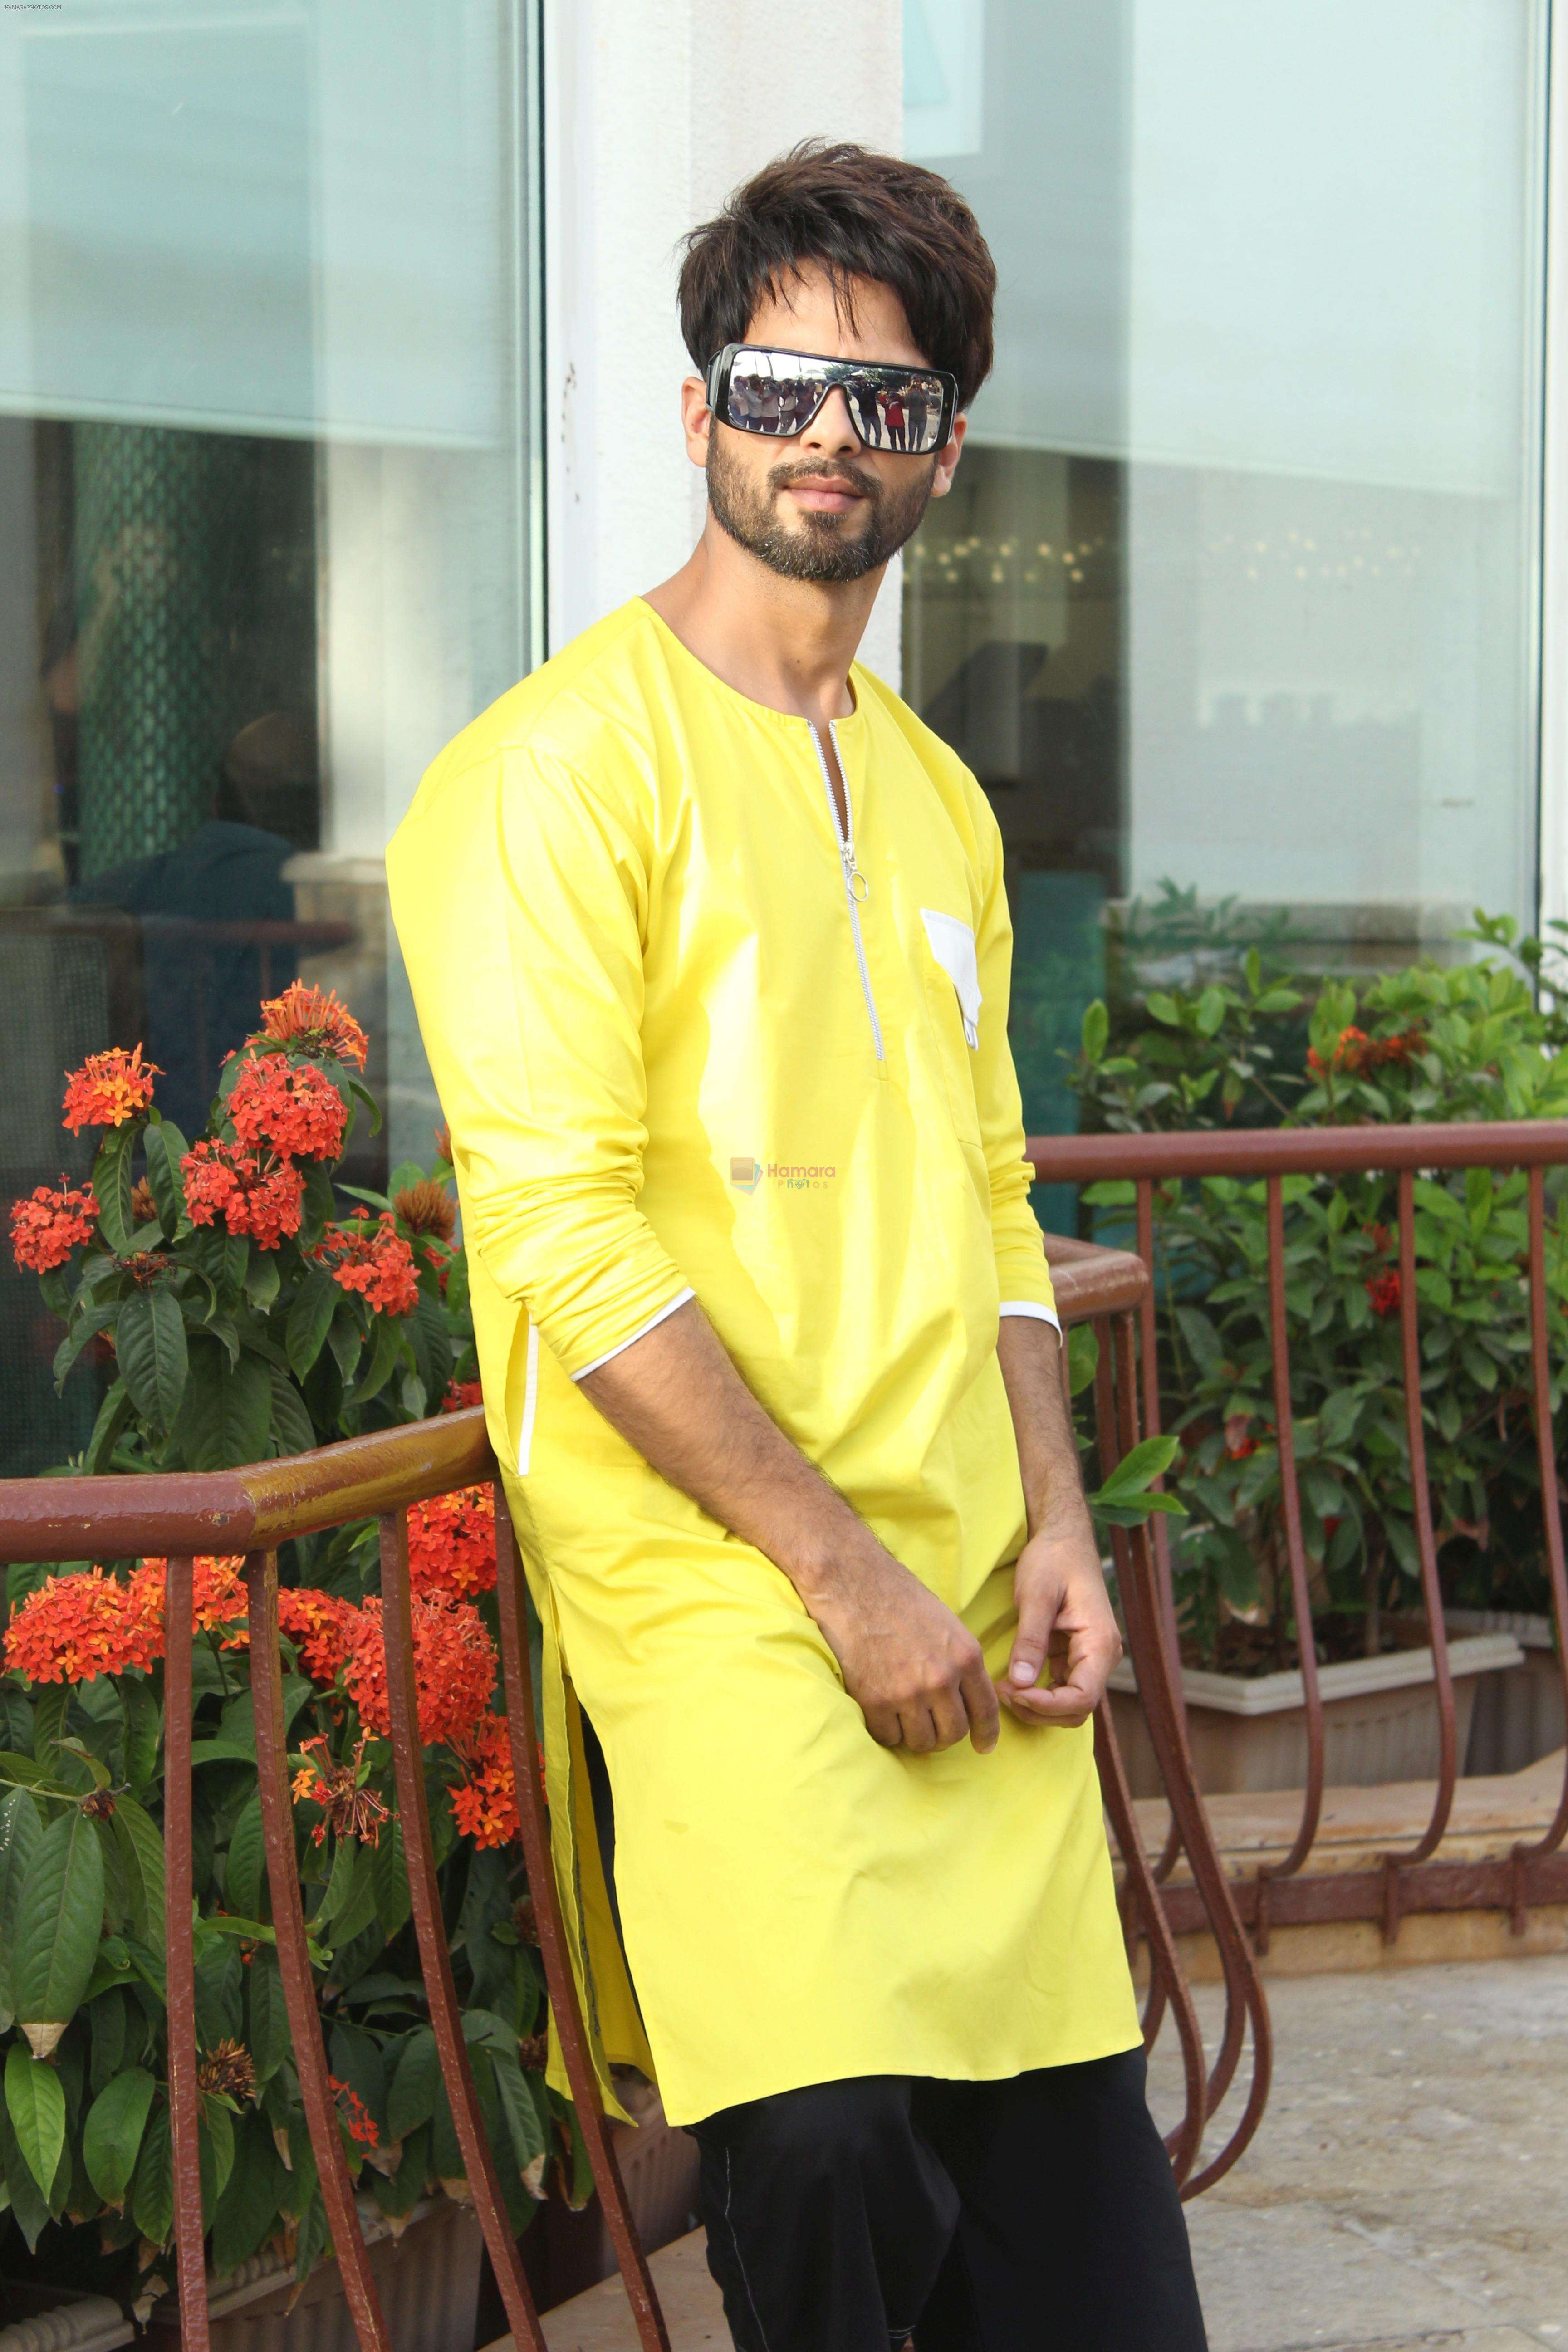 Shahid Kapoor at Sun n sand for the promotion of Kabir sing on 1st June 2019